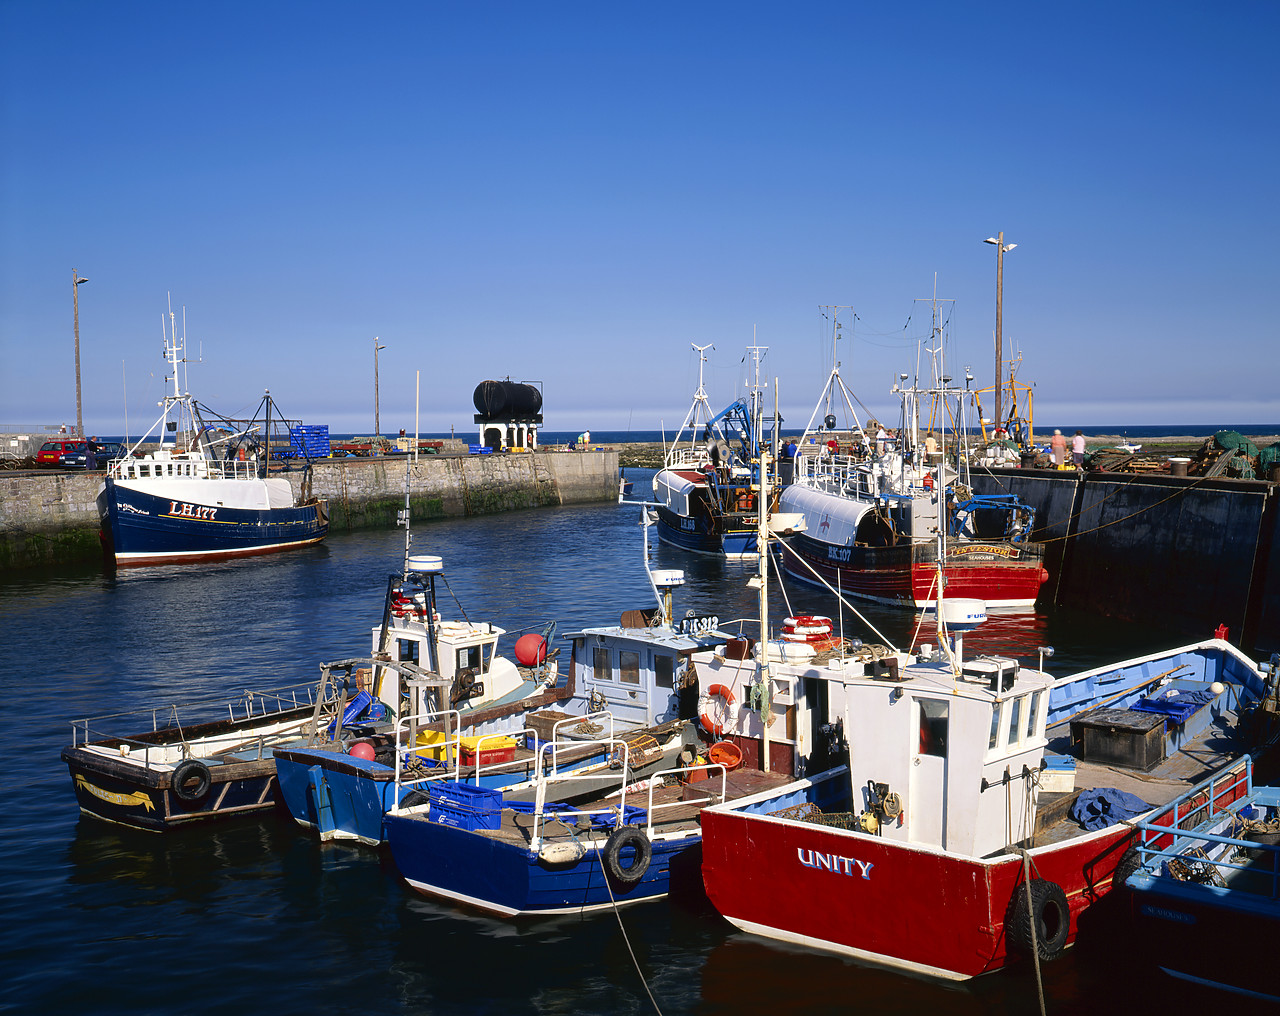 #955601 - Seahouses Harbour, Northumberland, England